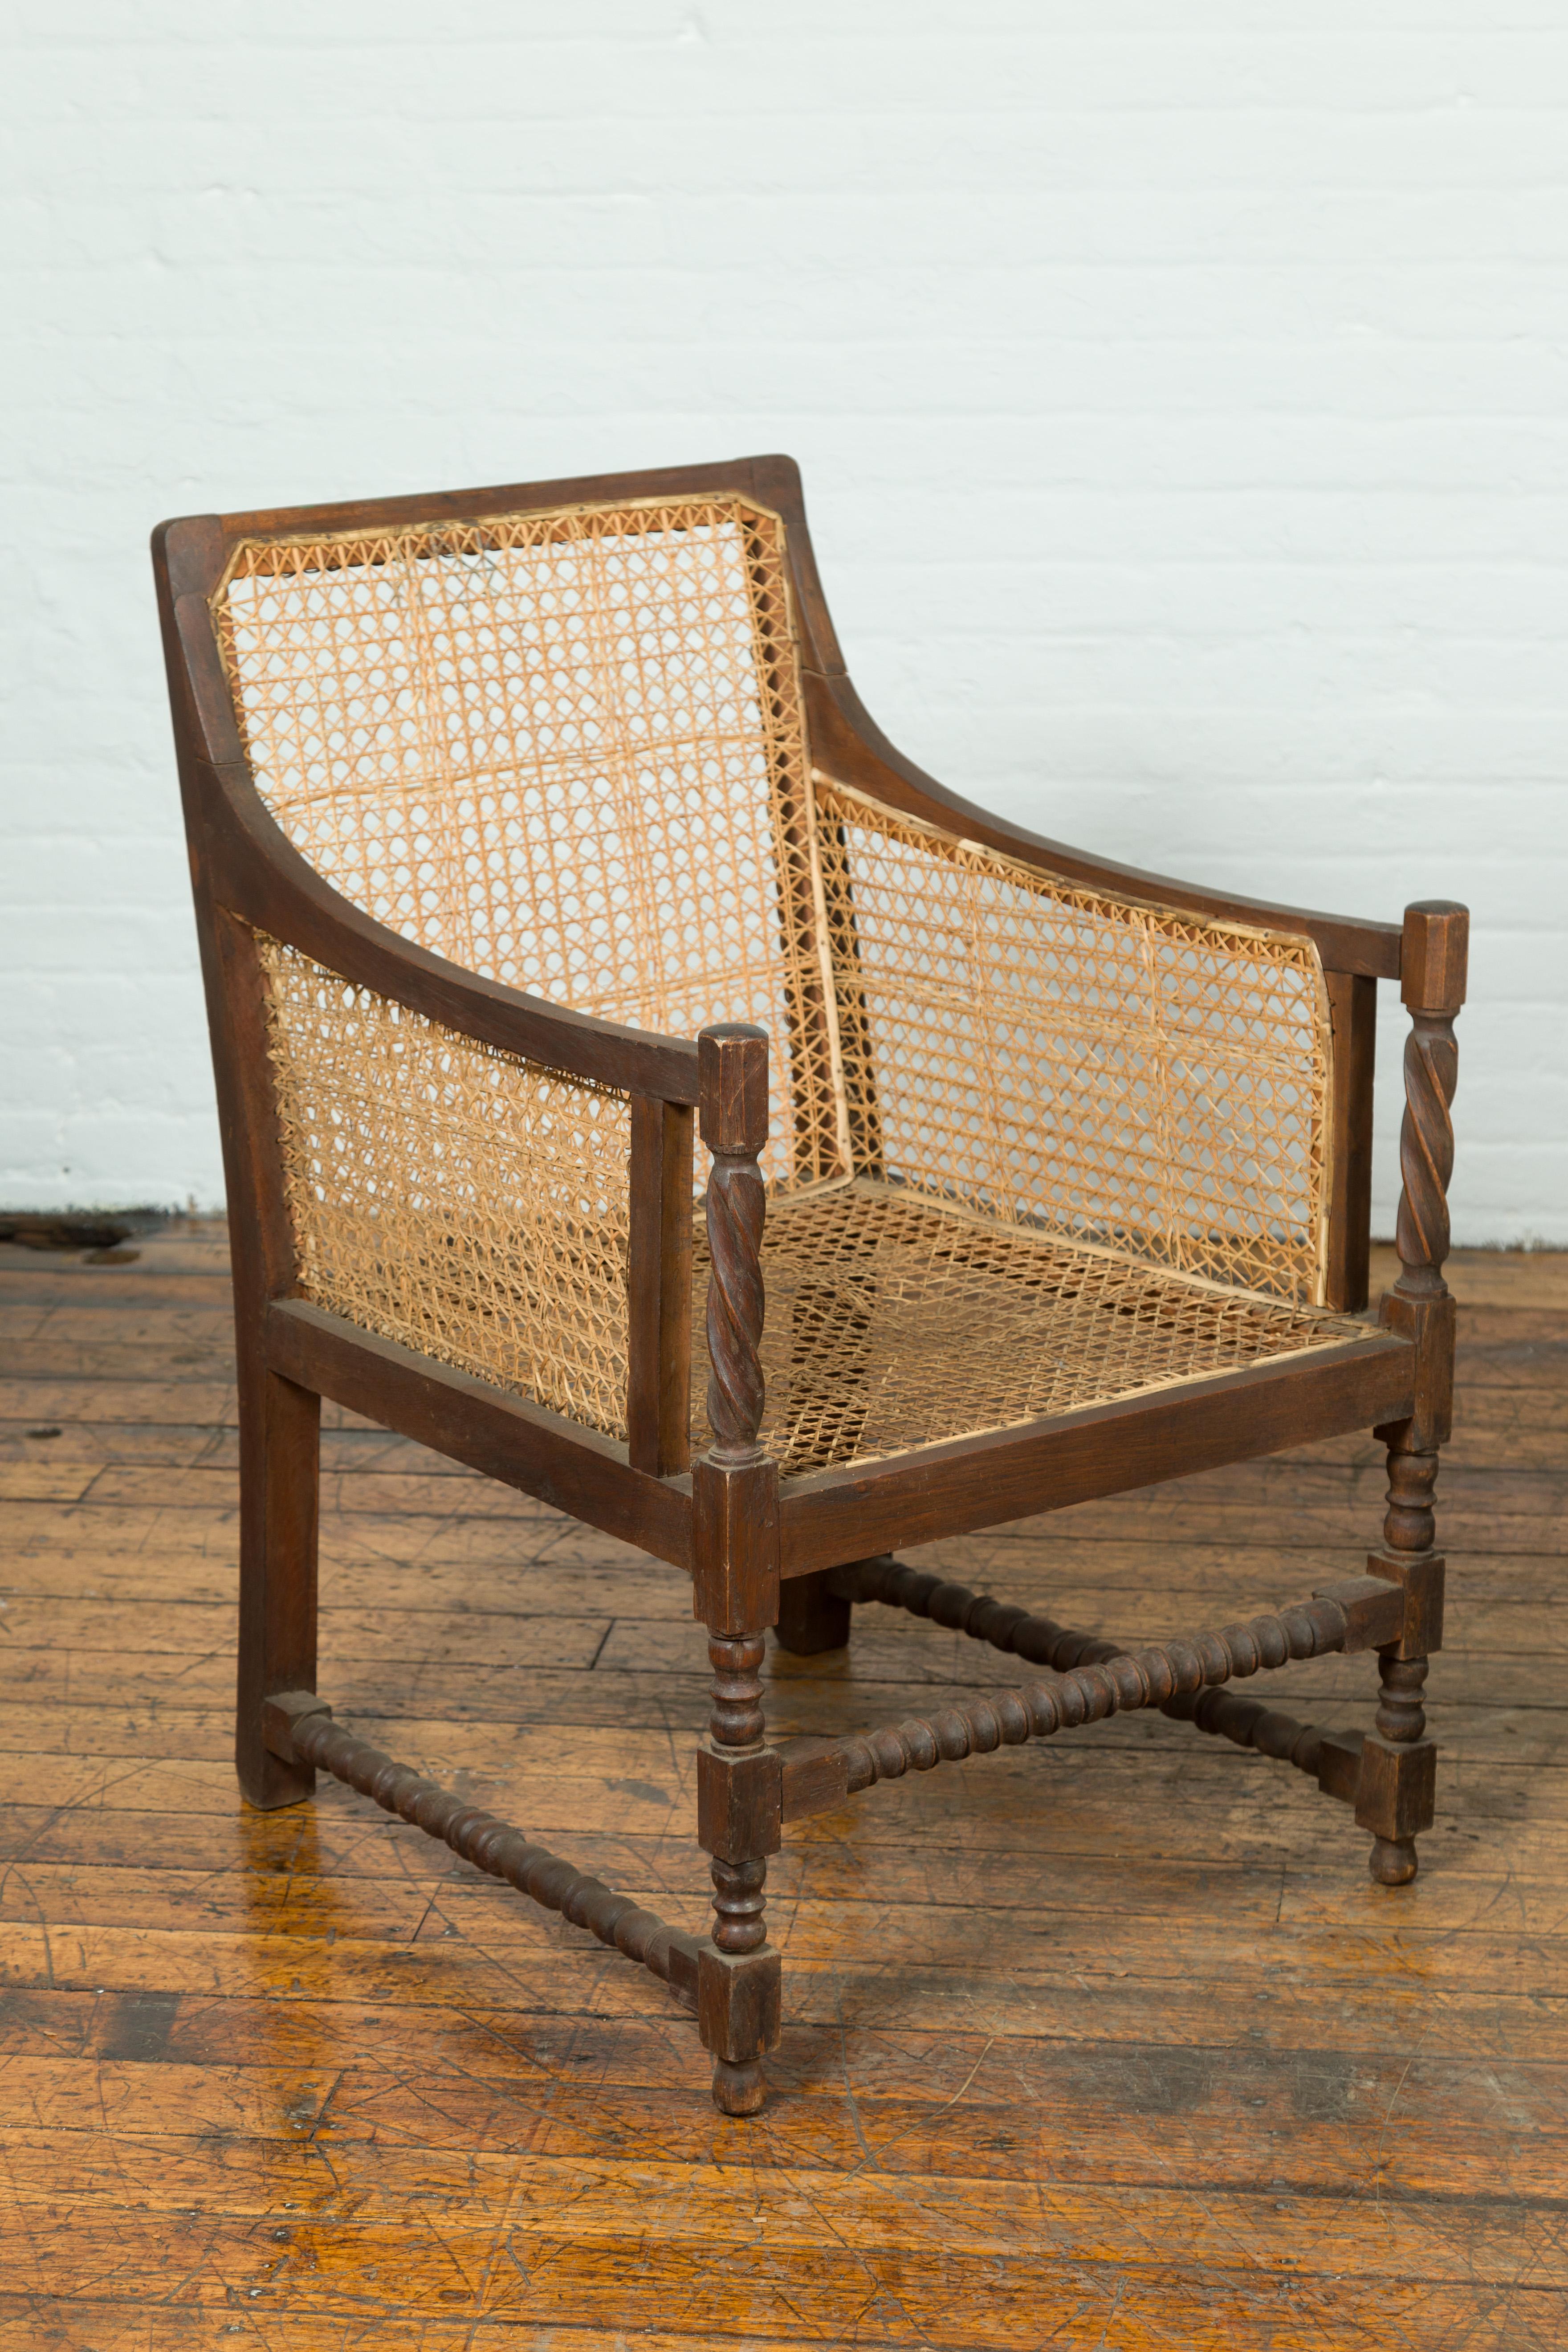 19th Century Pair of Antique Rustic Thai Turned Wood Armchairs with Rattan Backs and Seats